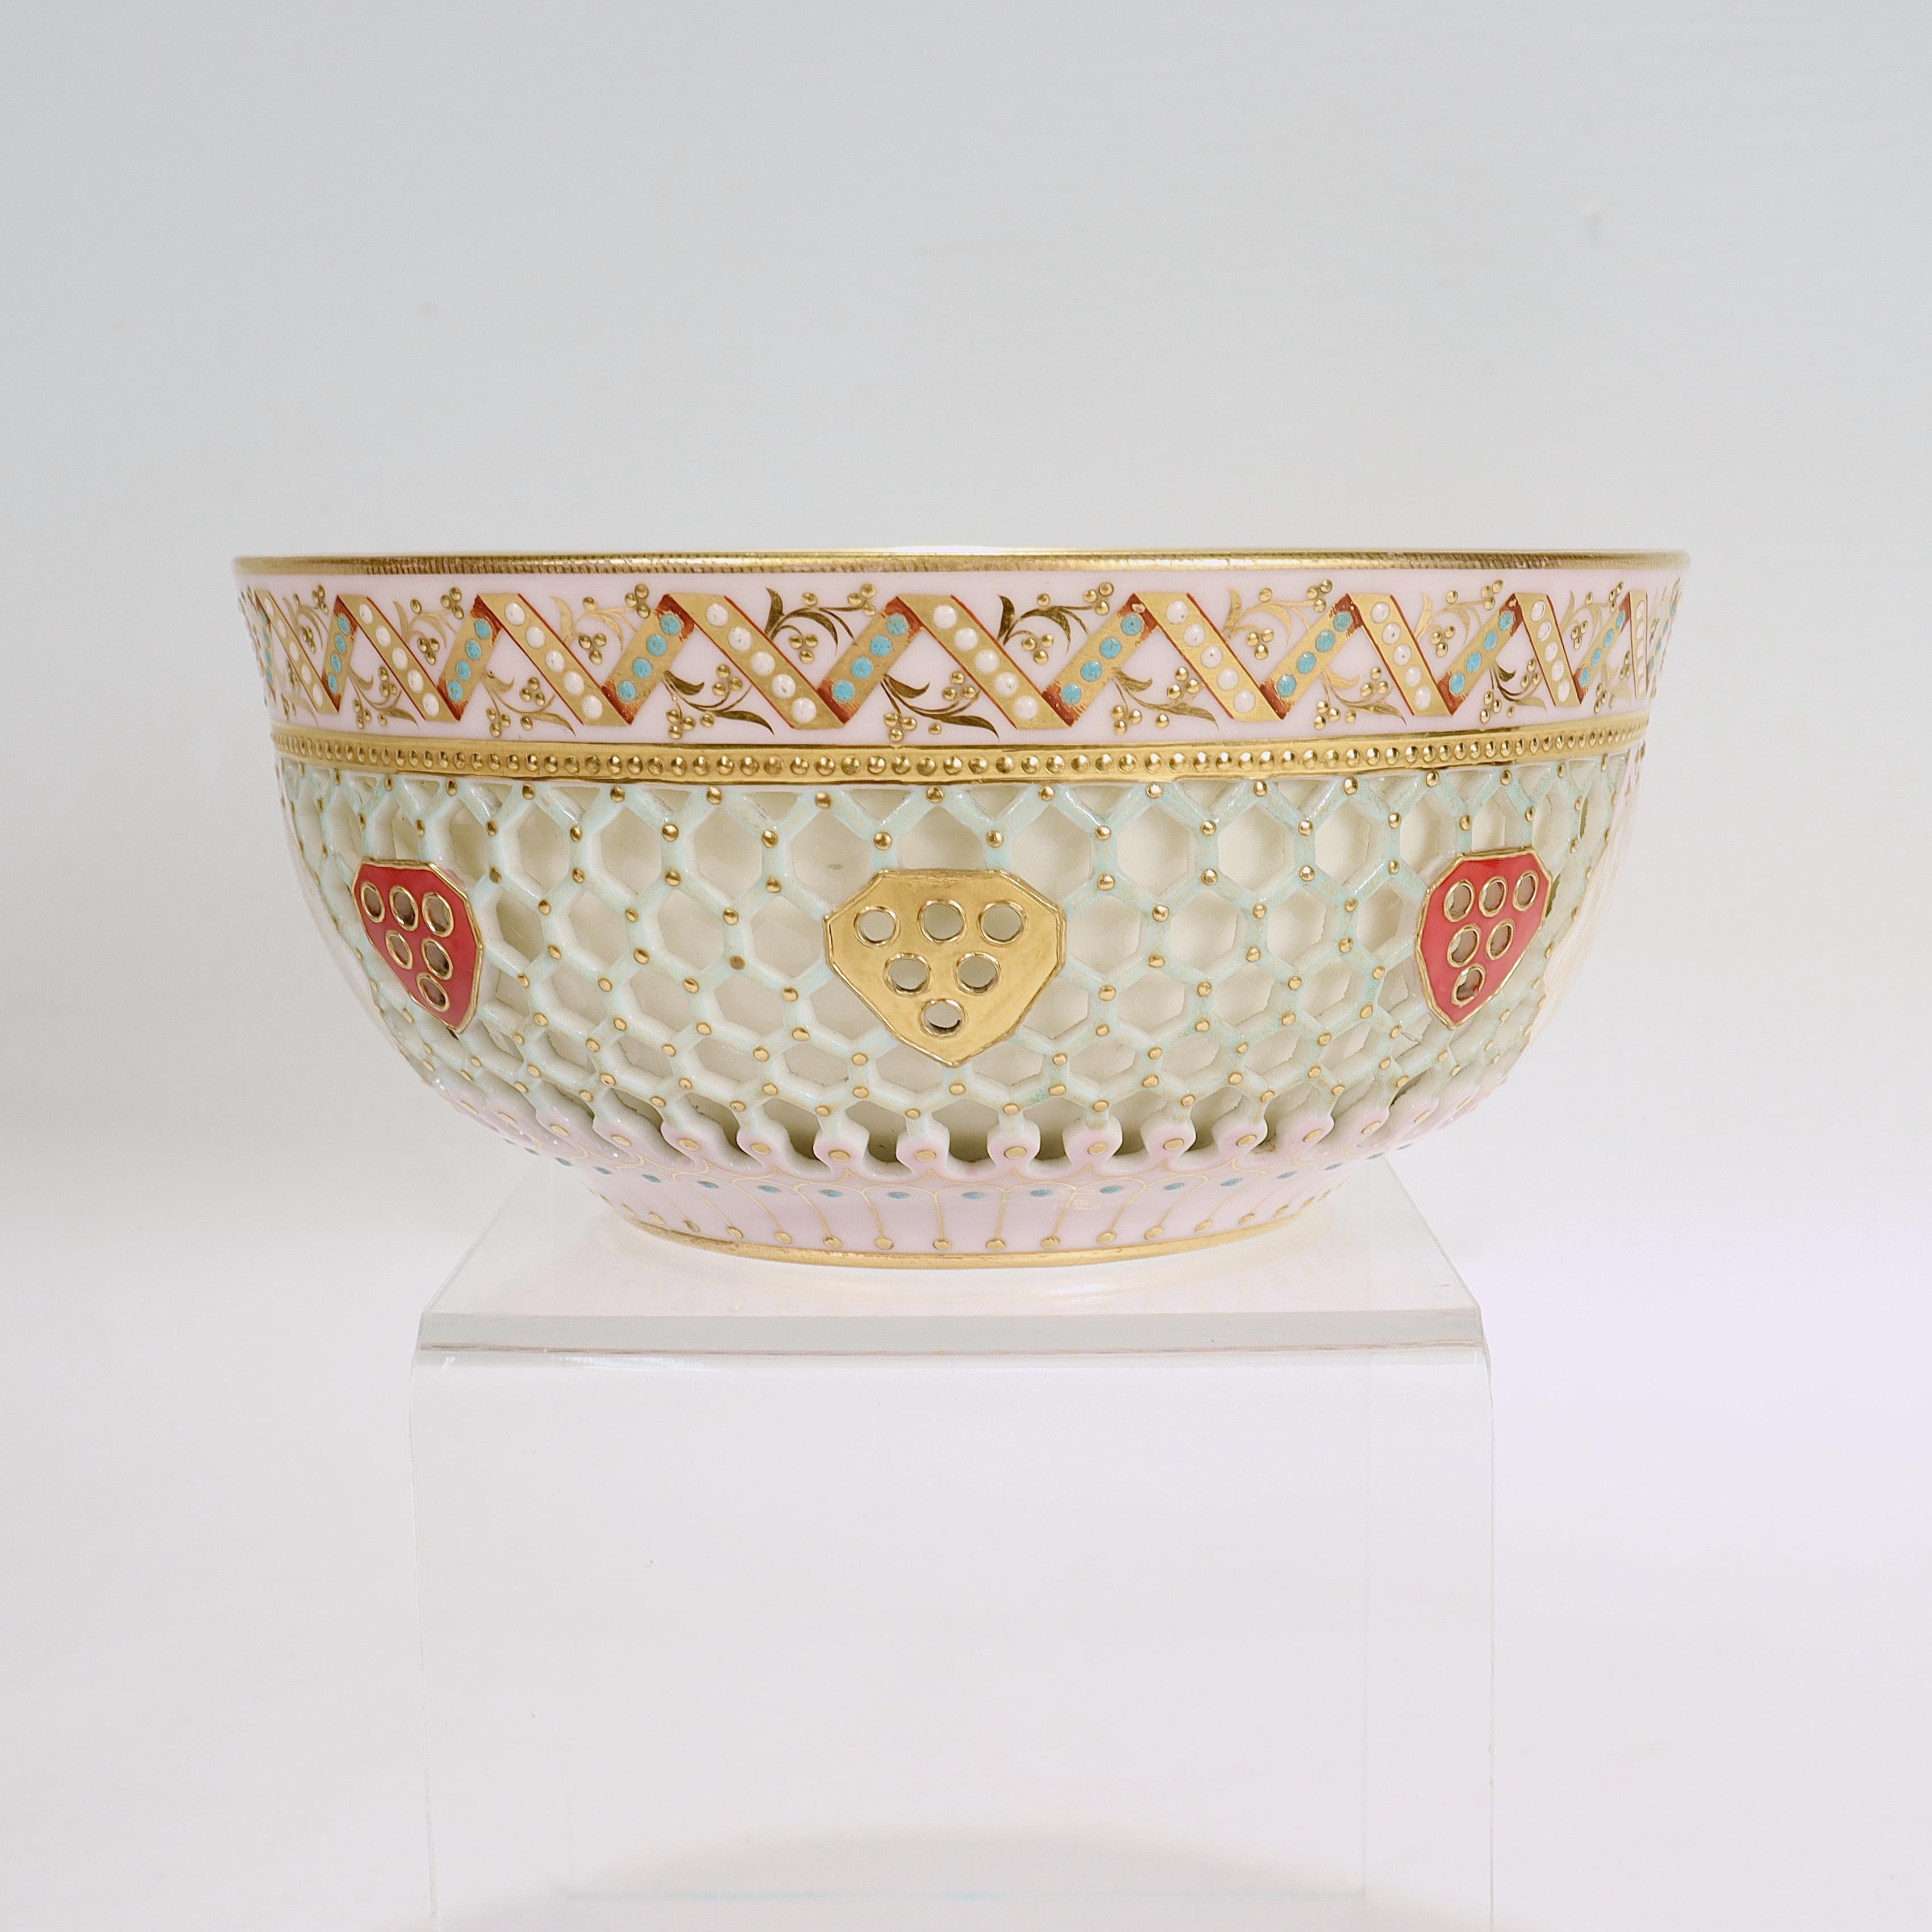 Aesthetic Movement Reticulated Royal Worcester Porcelain Bowl Attr. to George Owen & Samuel Ranford For Sale